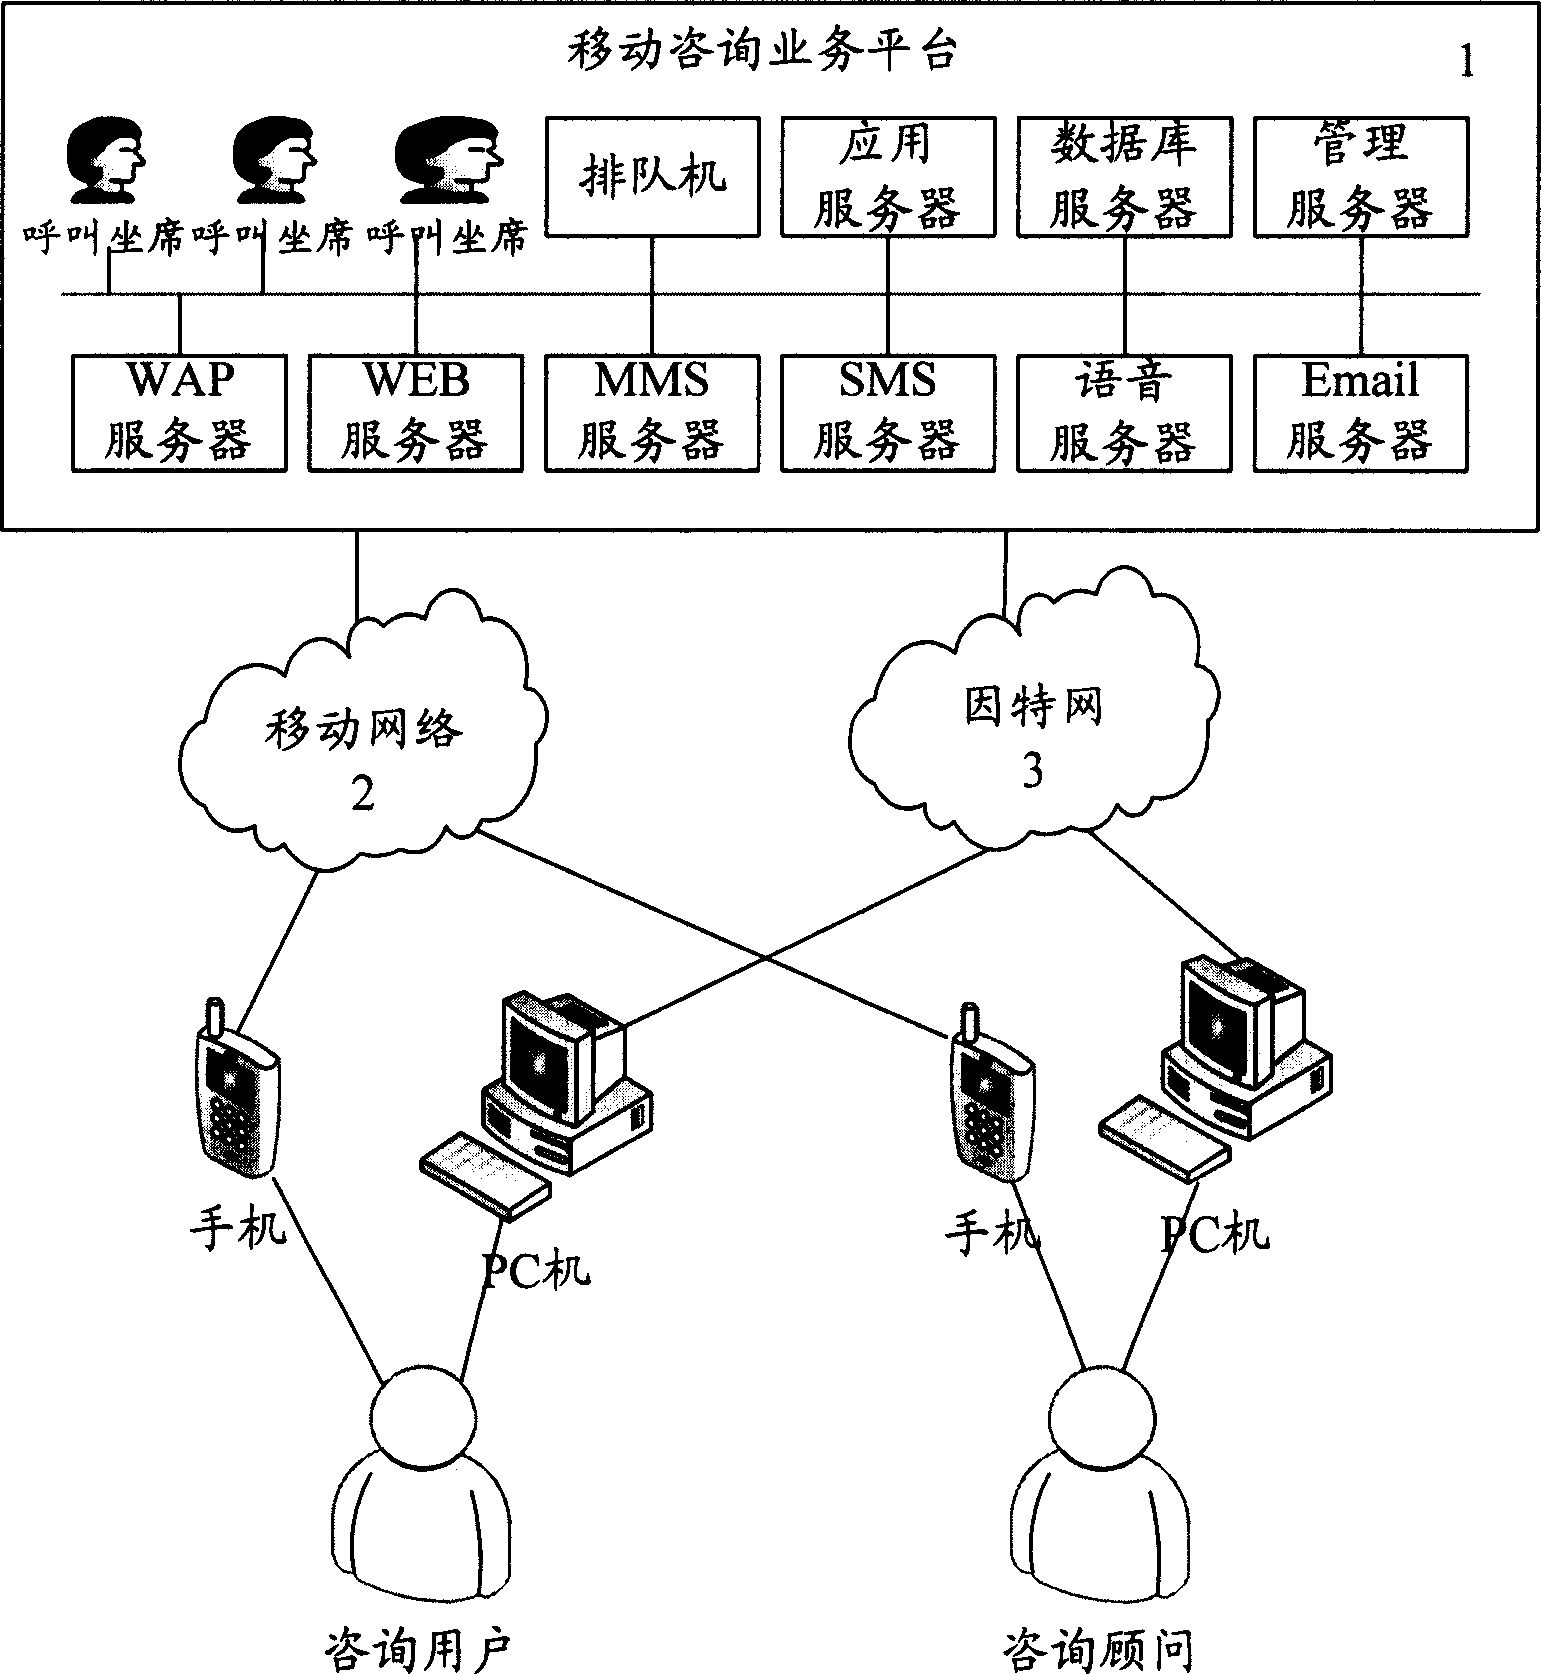 System and realization method for mobile consultation service between mobile users